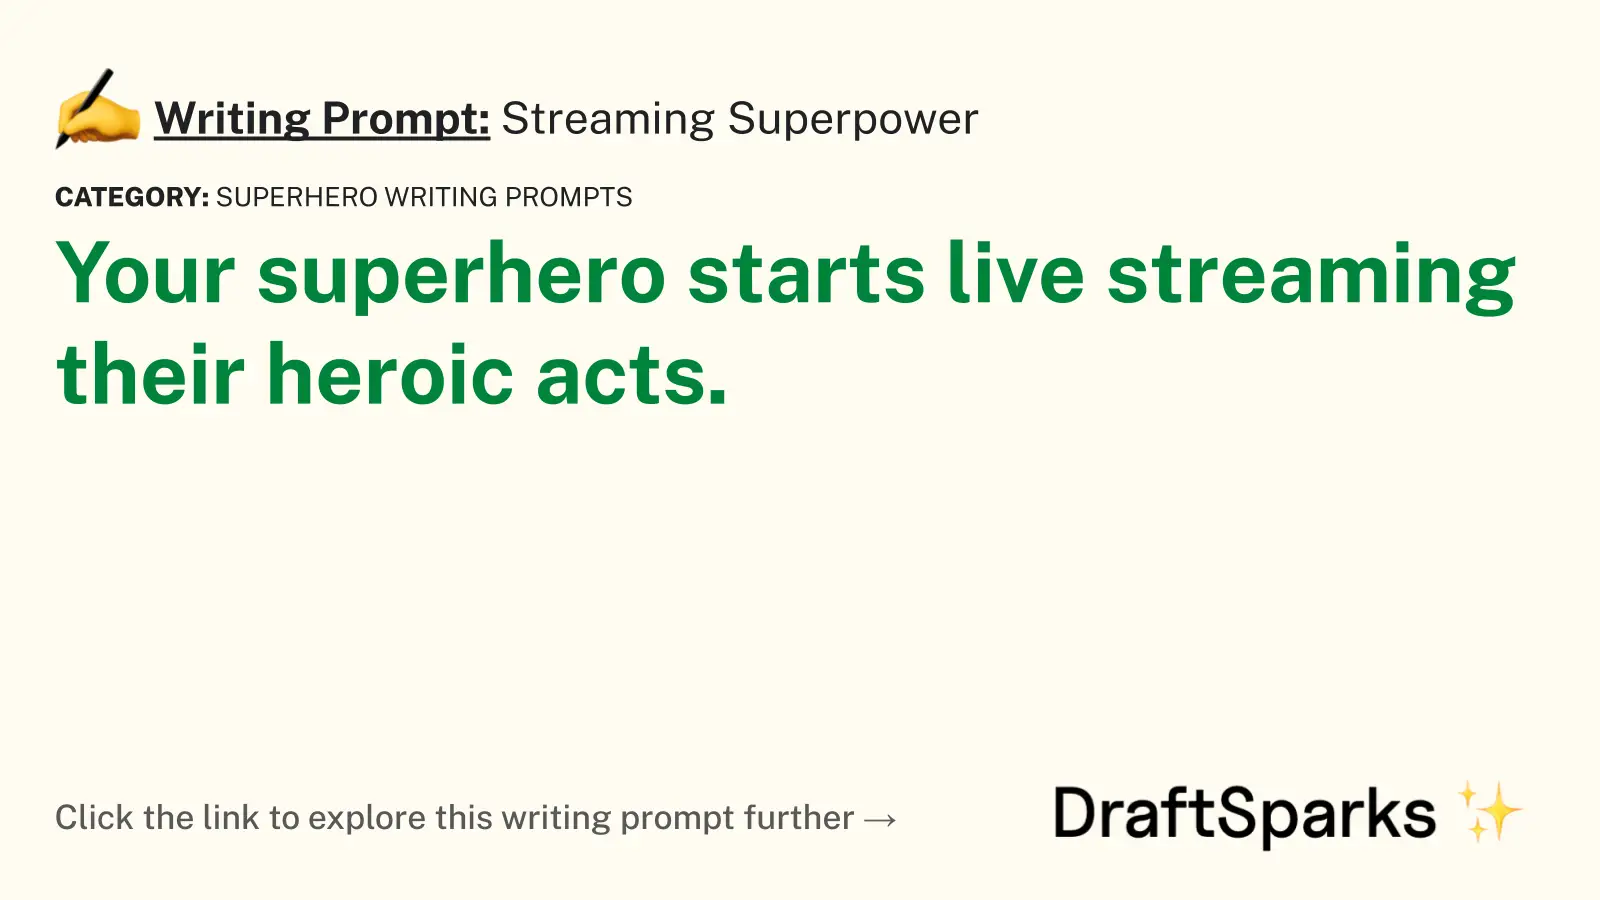 Streaming Superpower